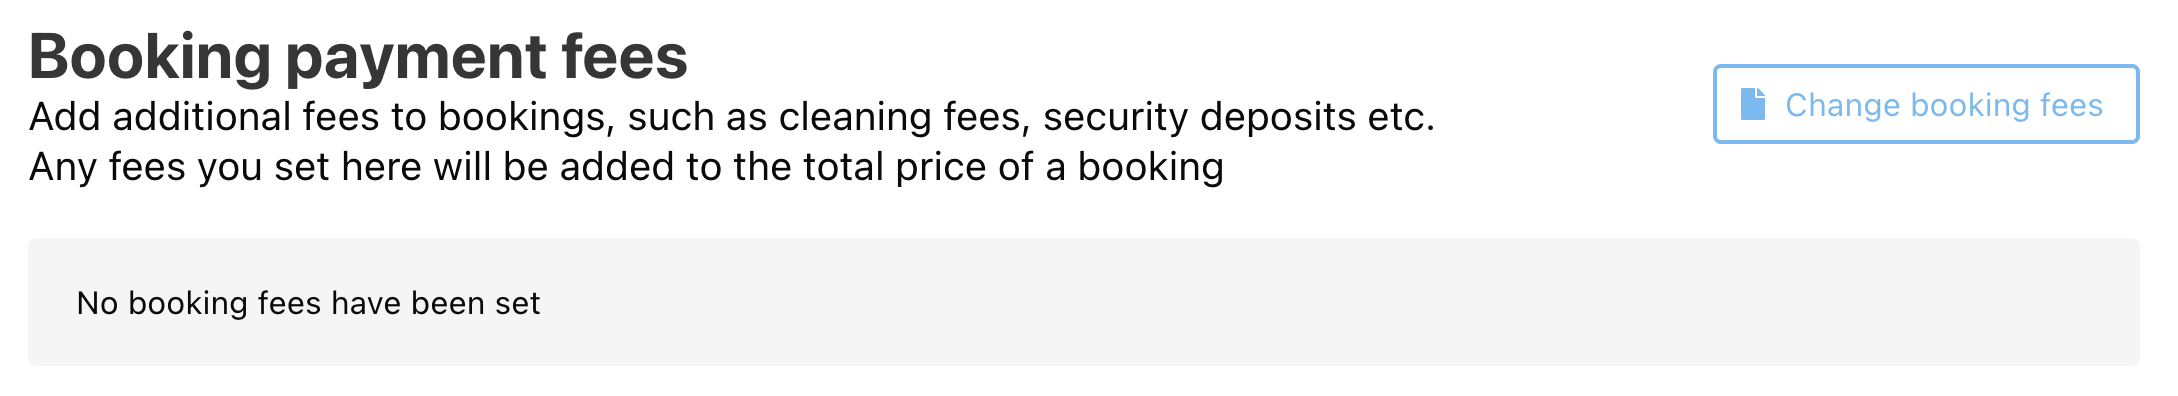 Booking fees